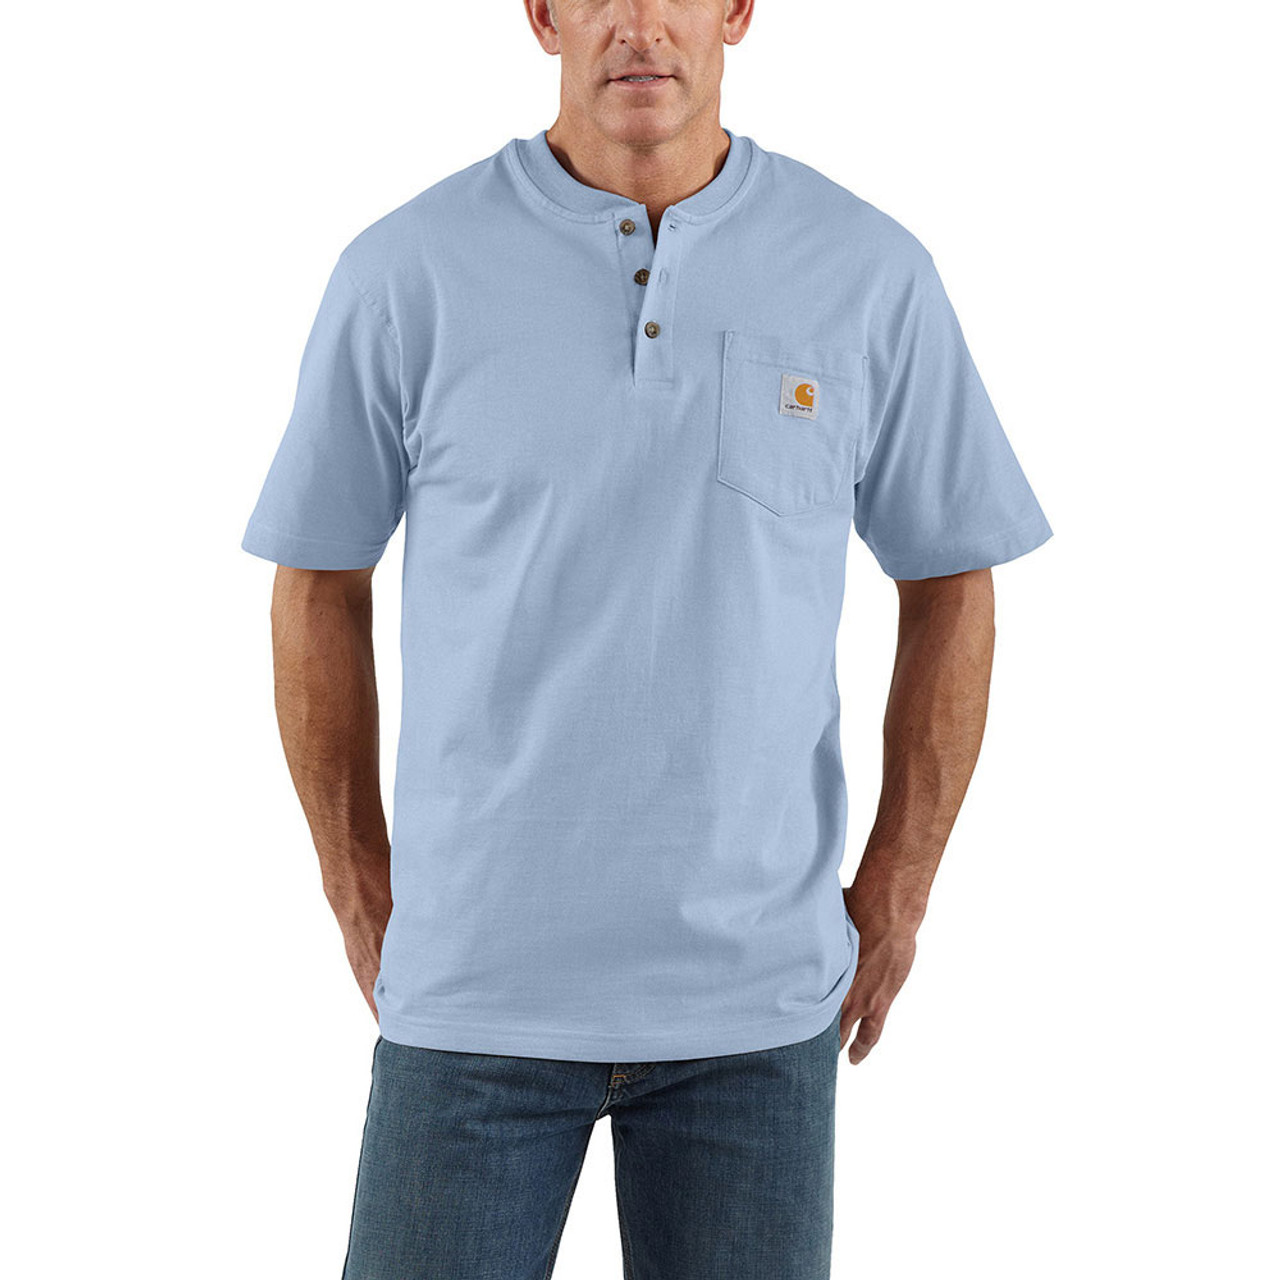 Men's Carhartt Big and Tall Loose Fit Pocket Henley Tee